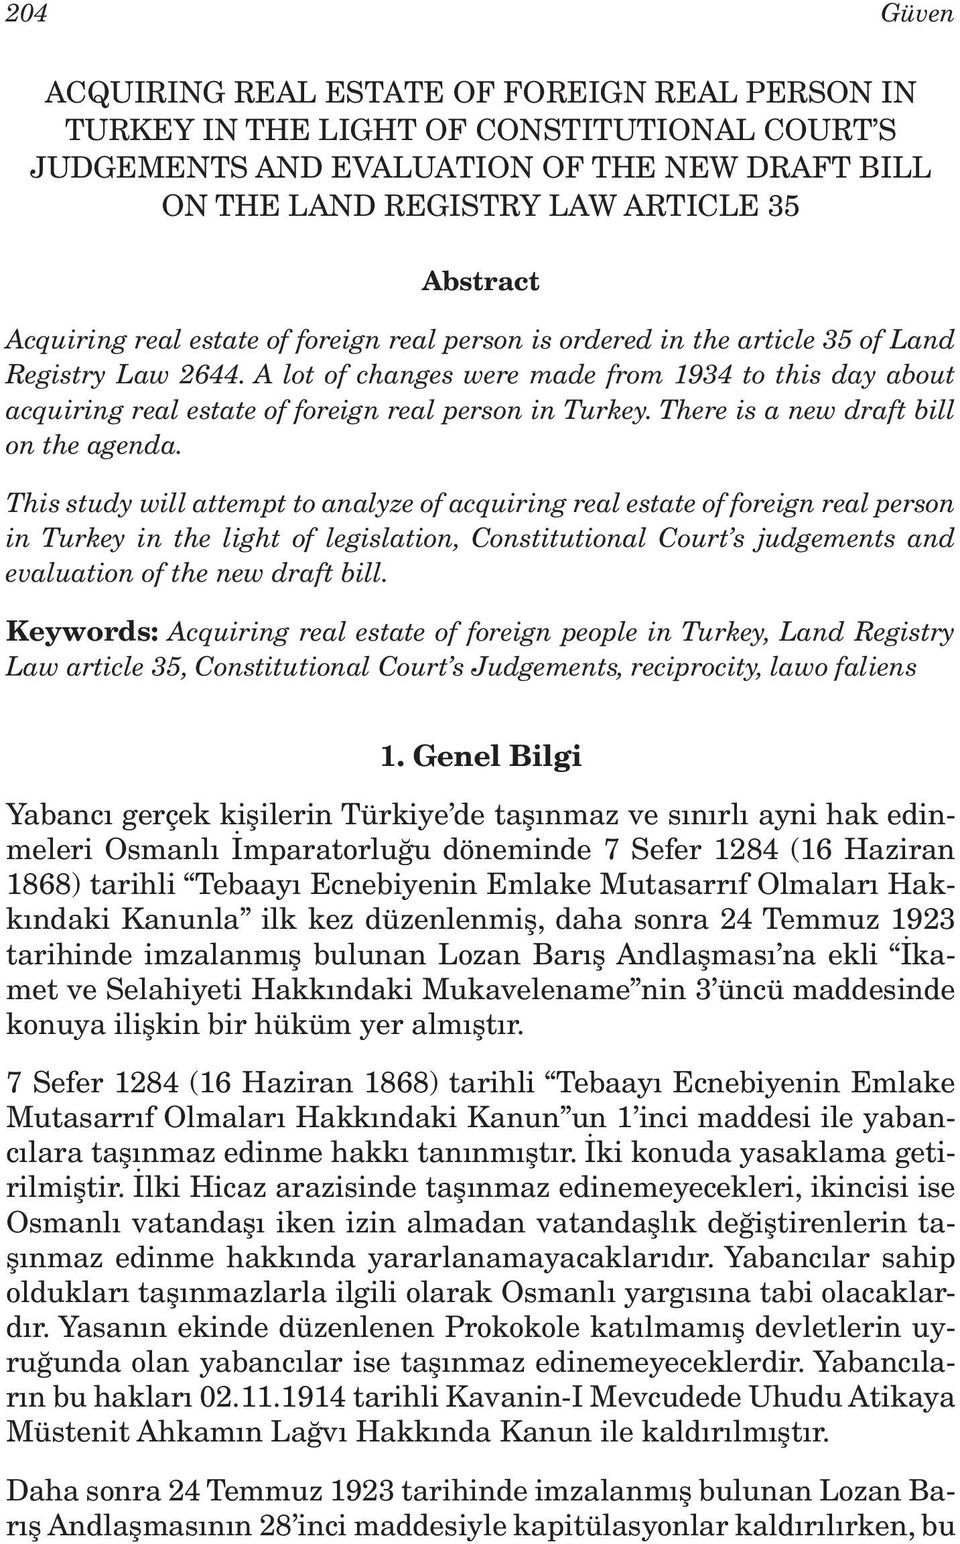 A lot of changes were made from 1934 to this day about acquiring real estate of foreign real person in Turkey. There is a new draft bill on the agenda.